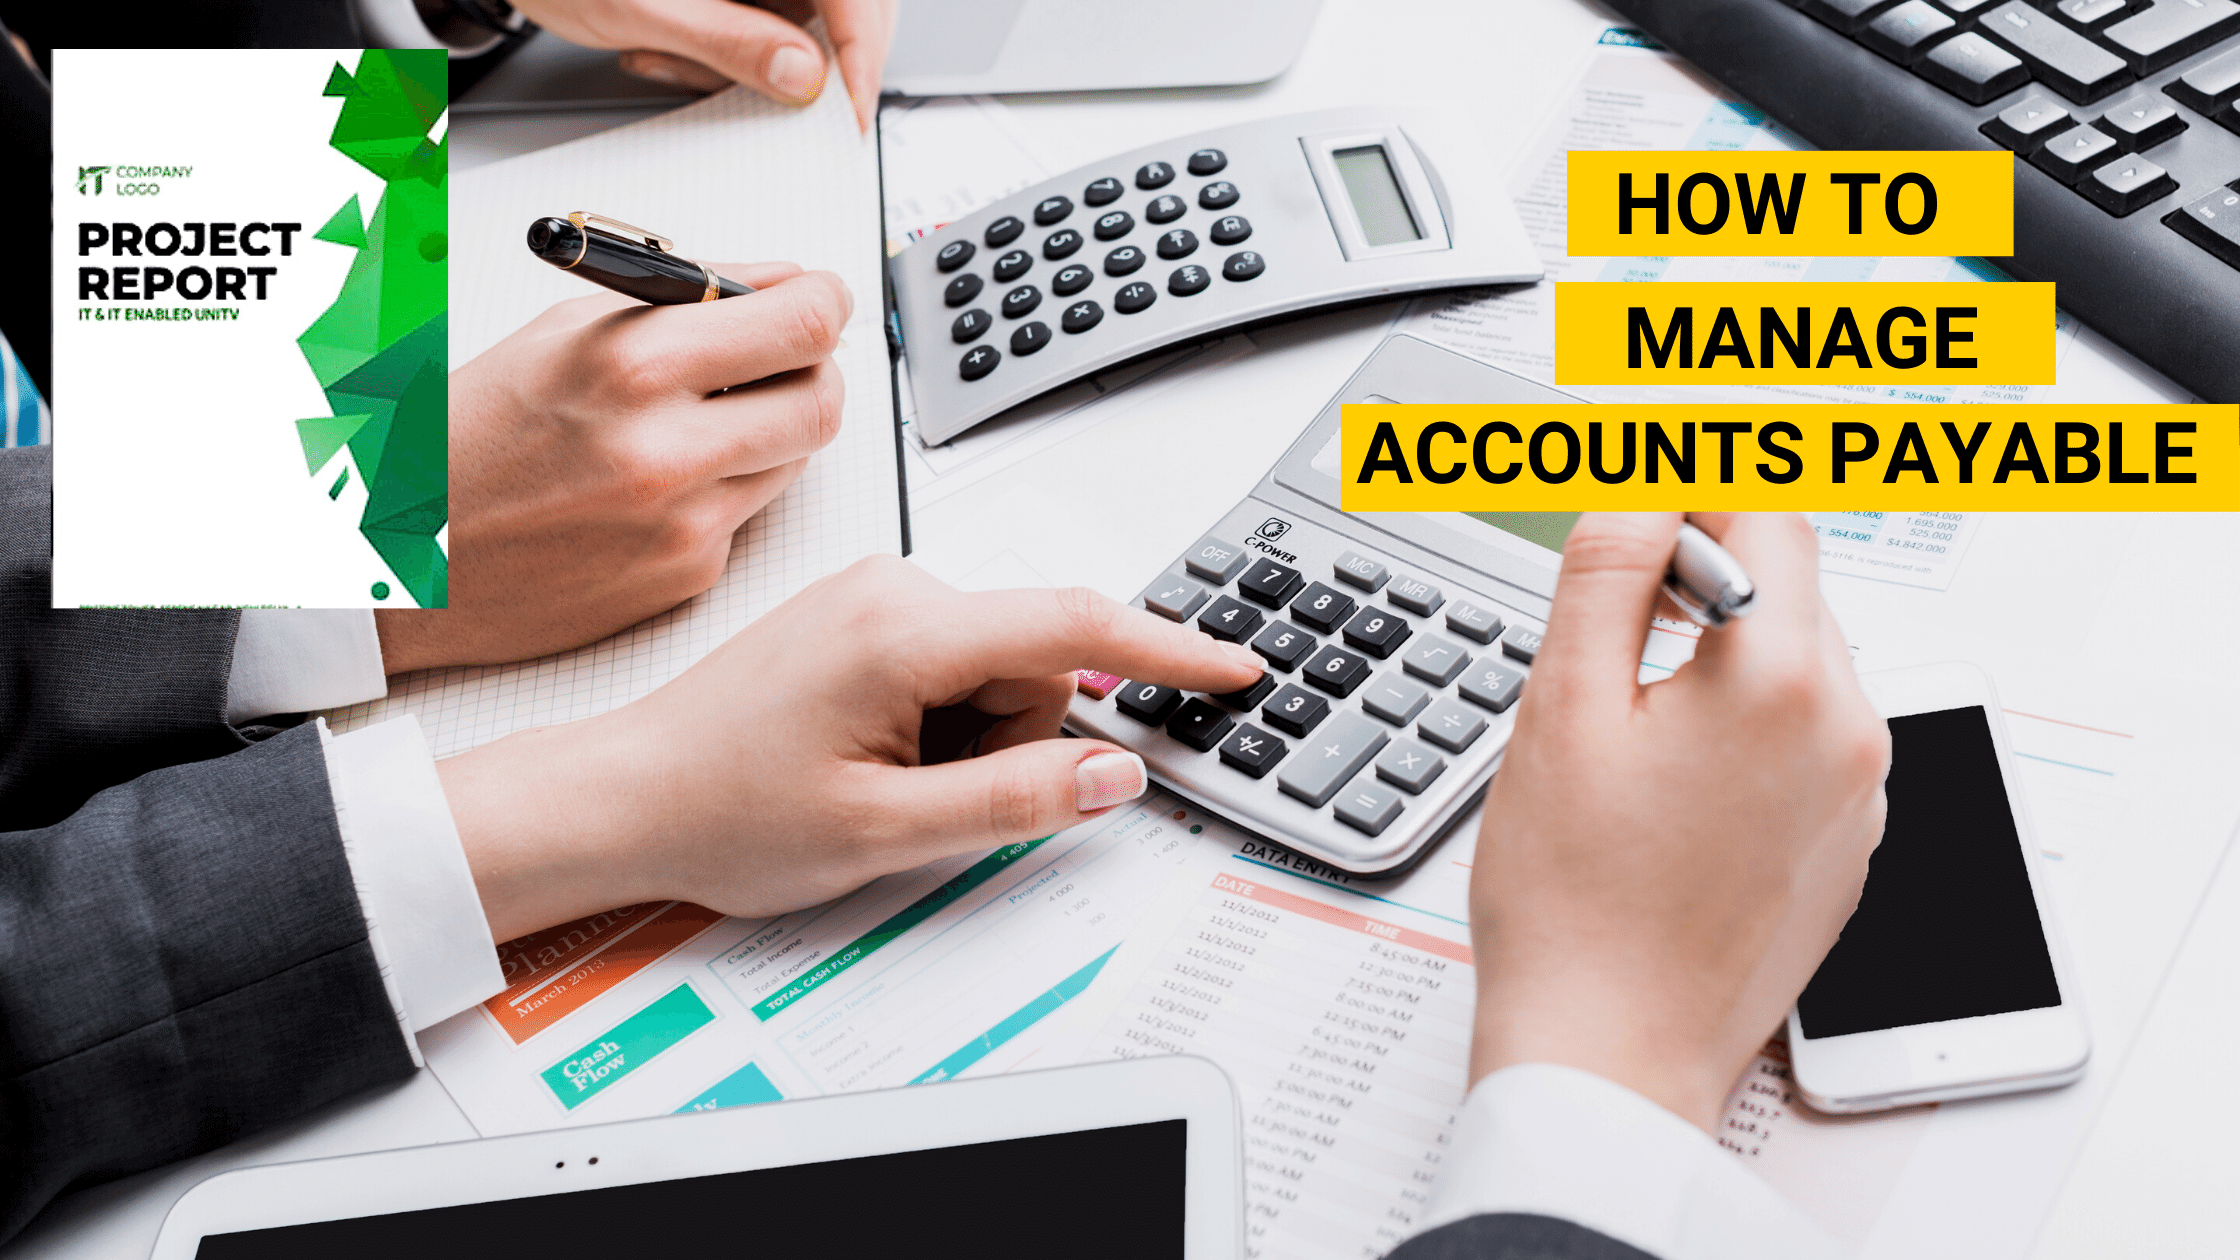 How to manage accounts payable